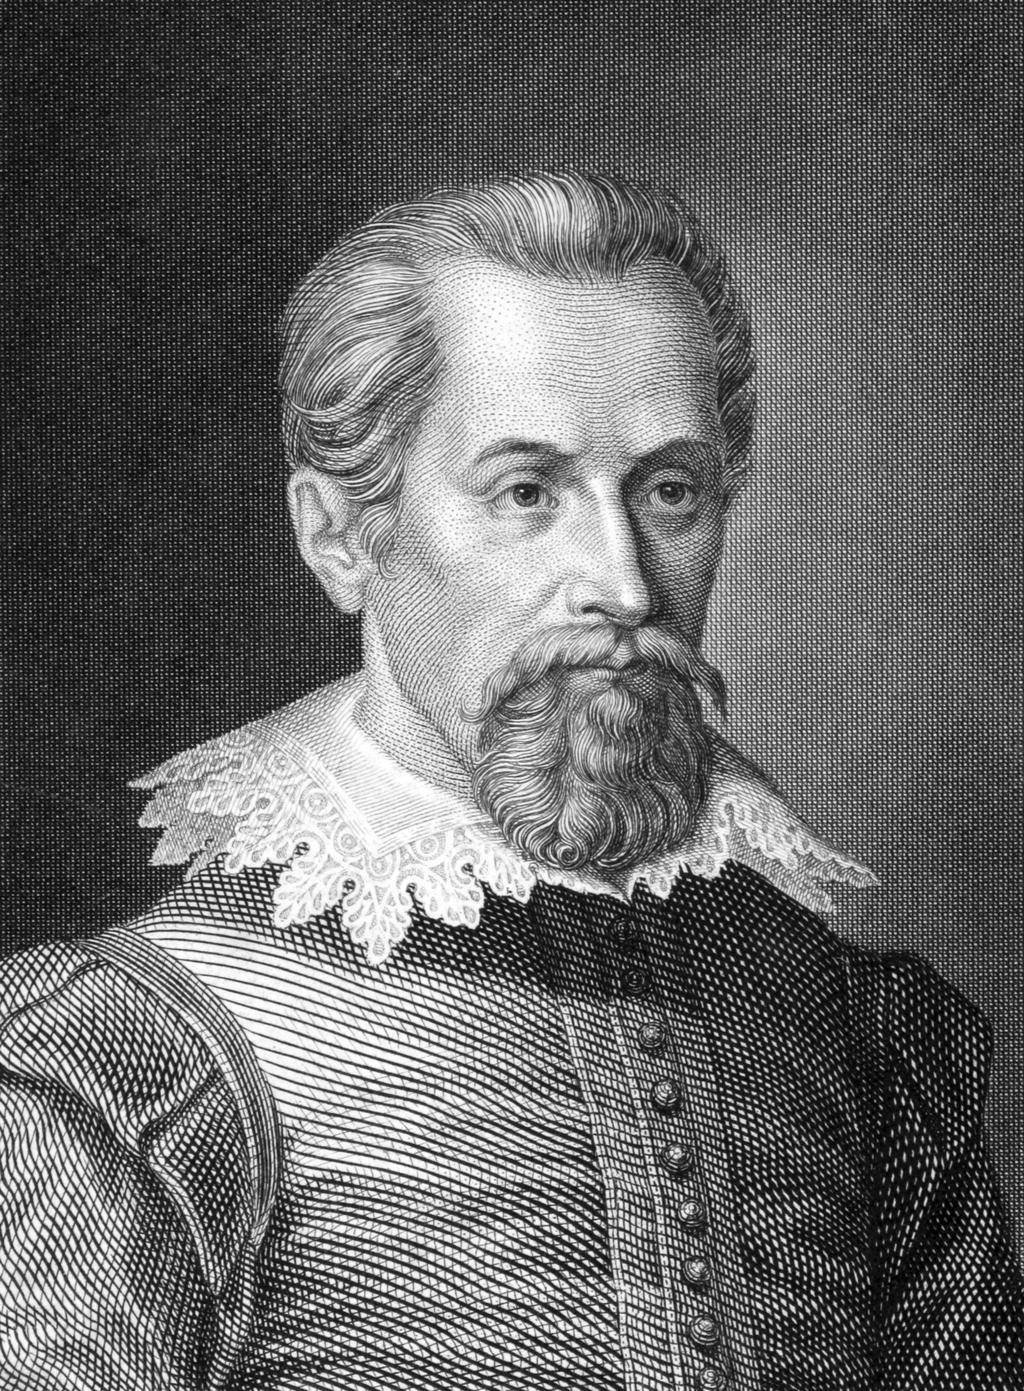 Kepleracceleration Circular In 1600 Tycho hired the German astronomer Johannes Kepler (1571-1630) to be his assistant.